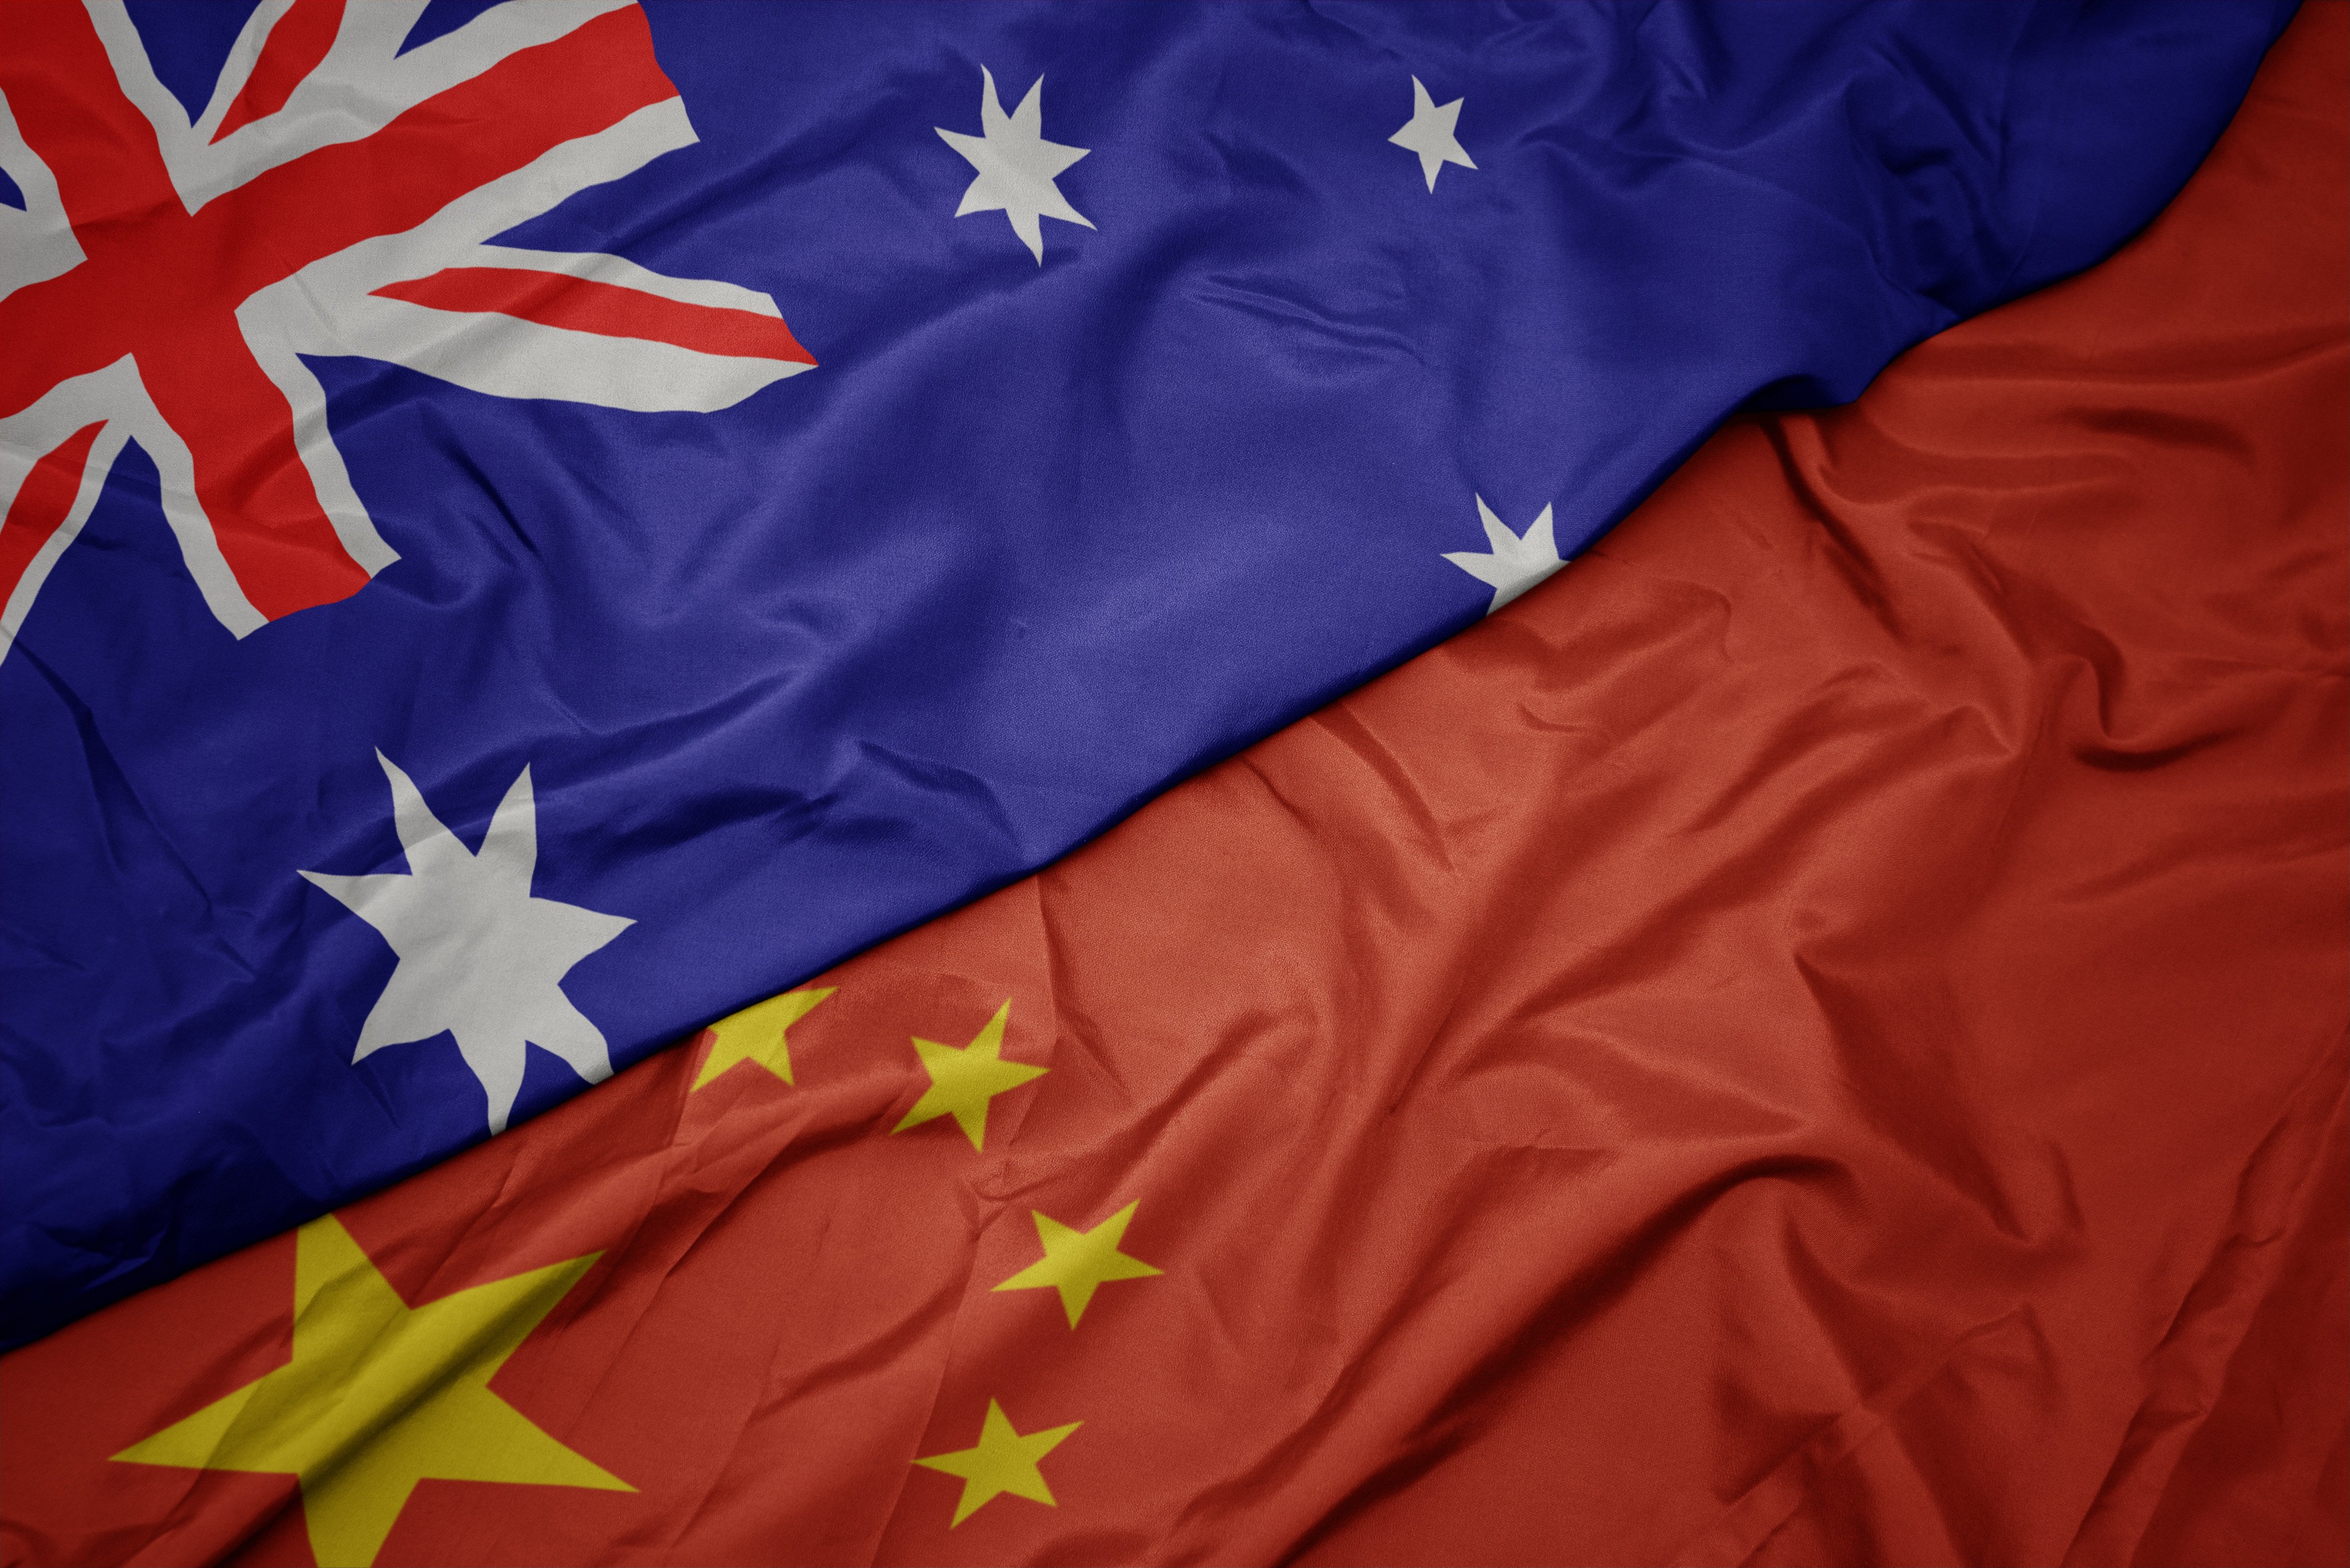 The national flags of China and Australia. The Australian government has concluded a full-scale diversification from China to be “impossible” after a series of internal, classified studies. Photo: Shutterstock